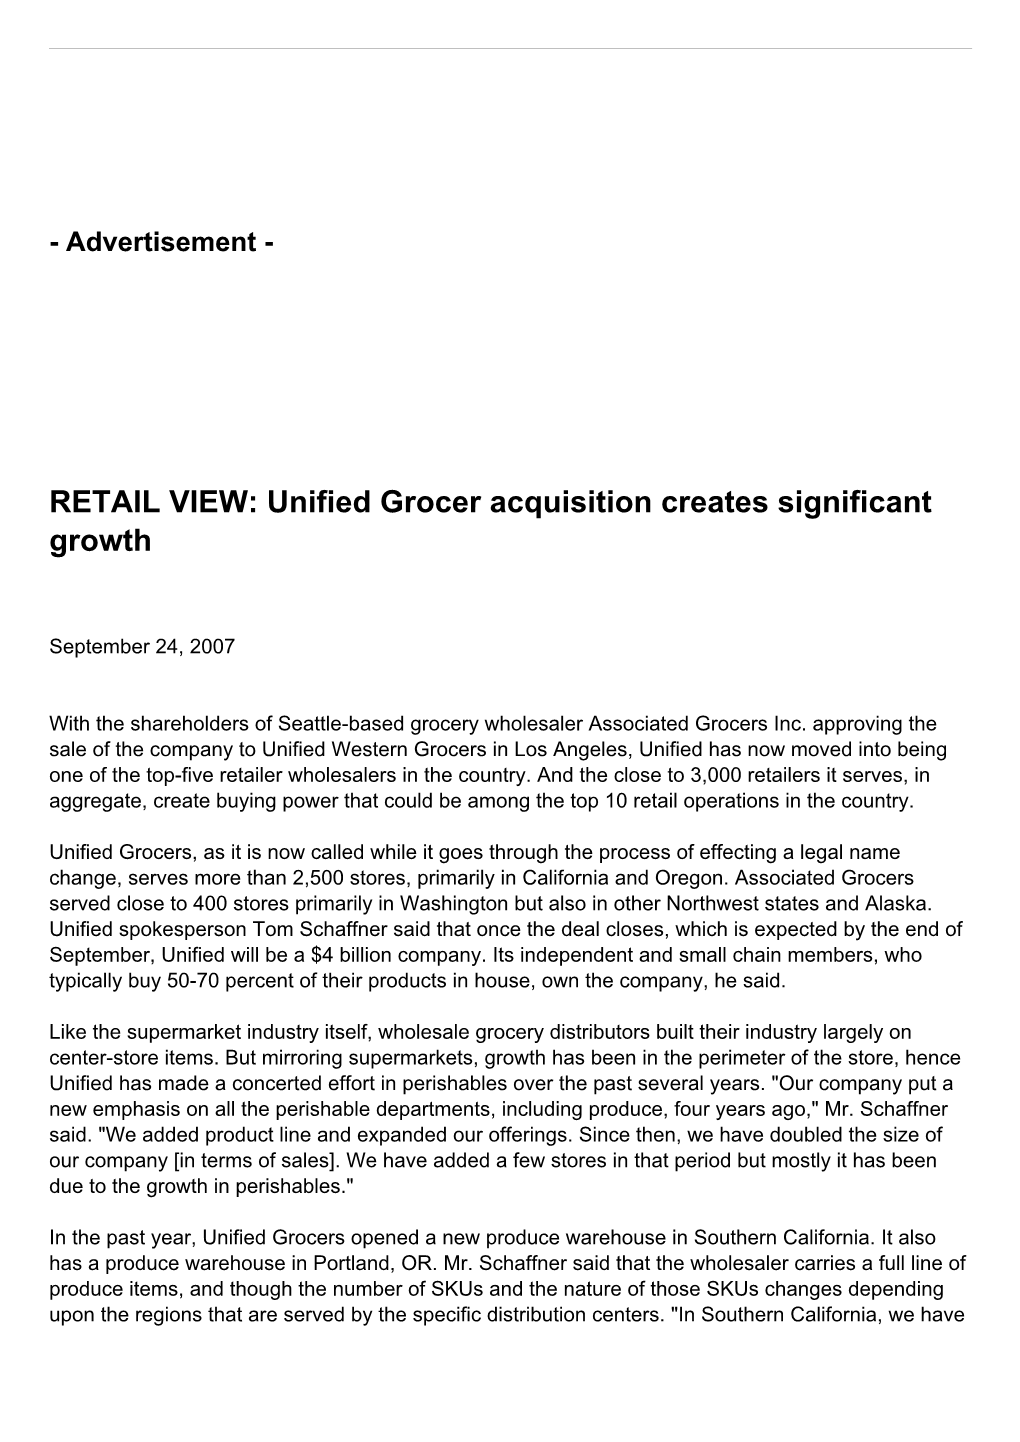 RETAIL VIEW: Unified Grocer Acquisition Creates Significant Growth